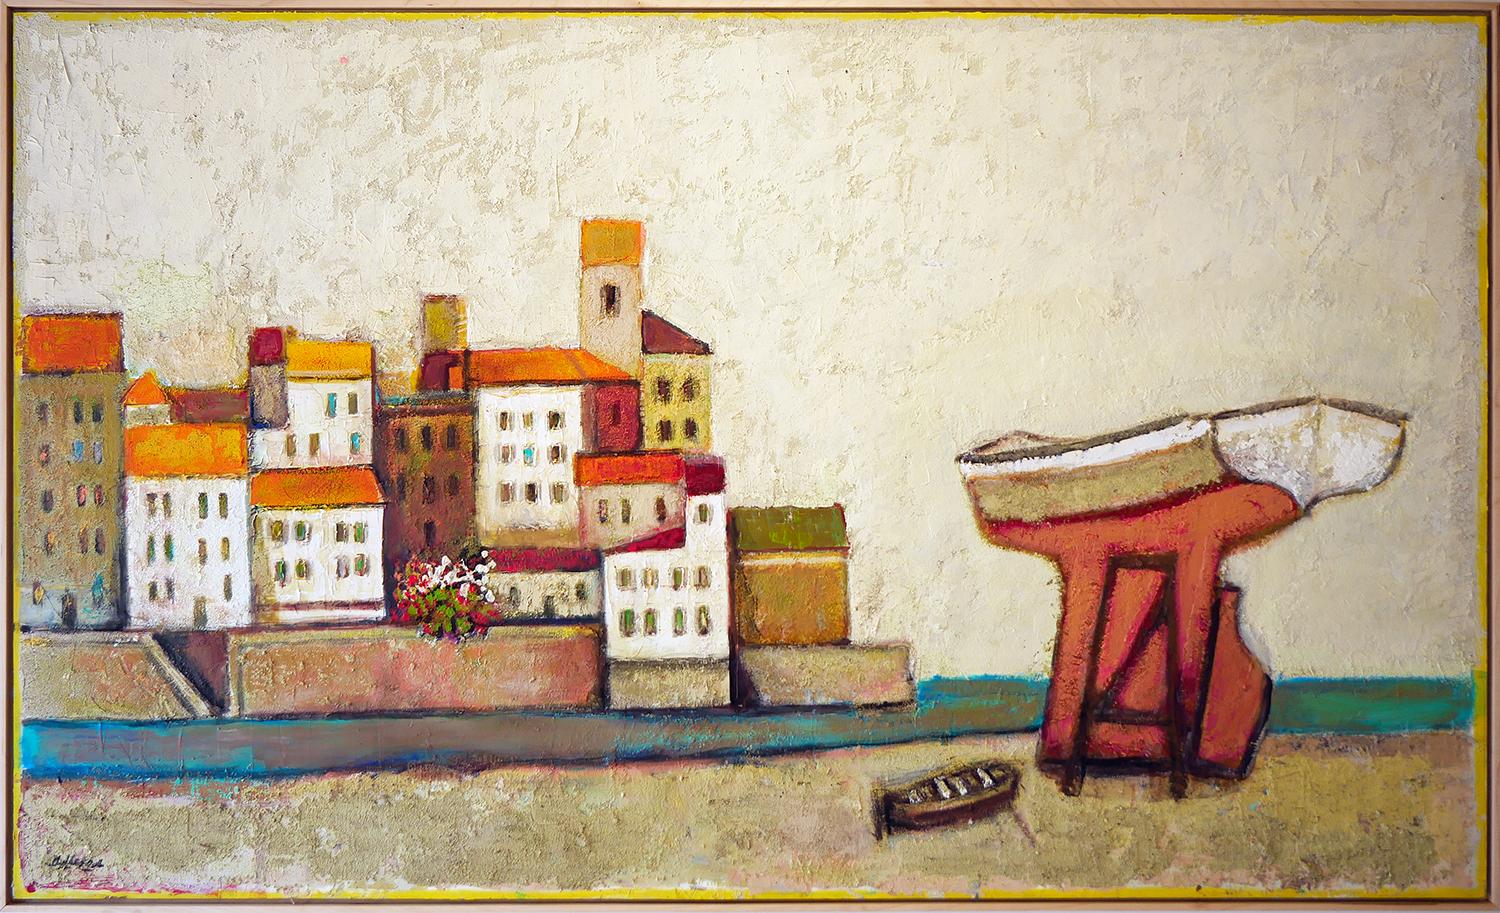 Warm-Toned Abstract Modern Village by the Ocean with Boats Landscape - Painting by David Adickes